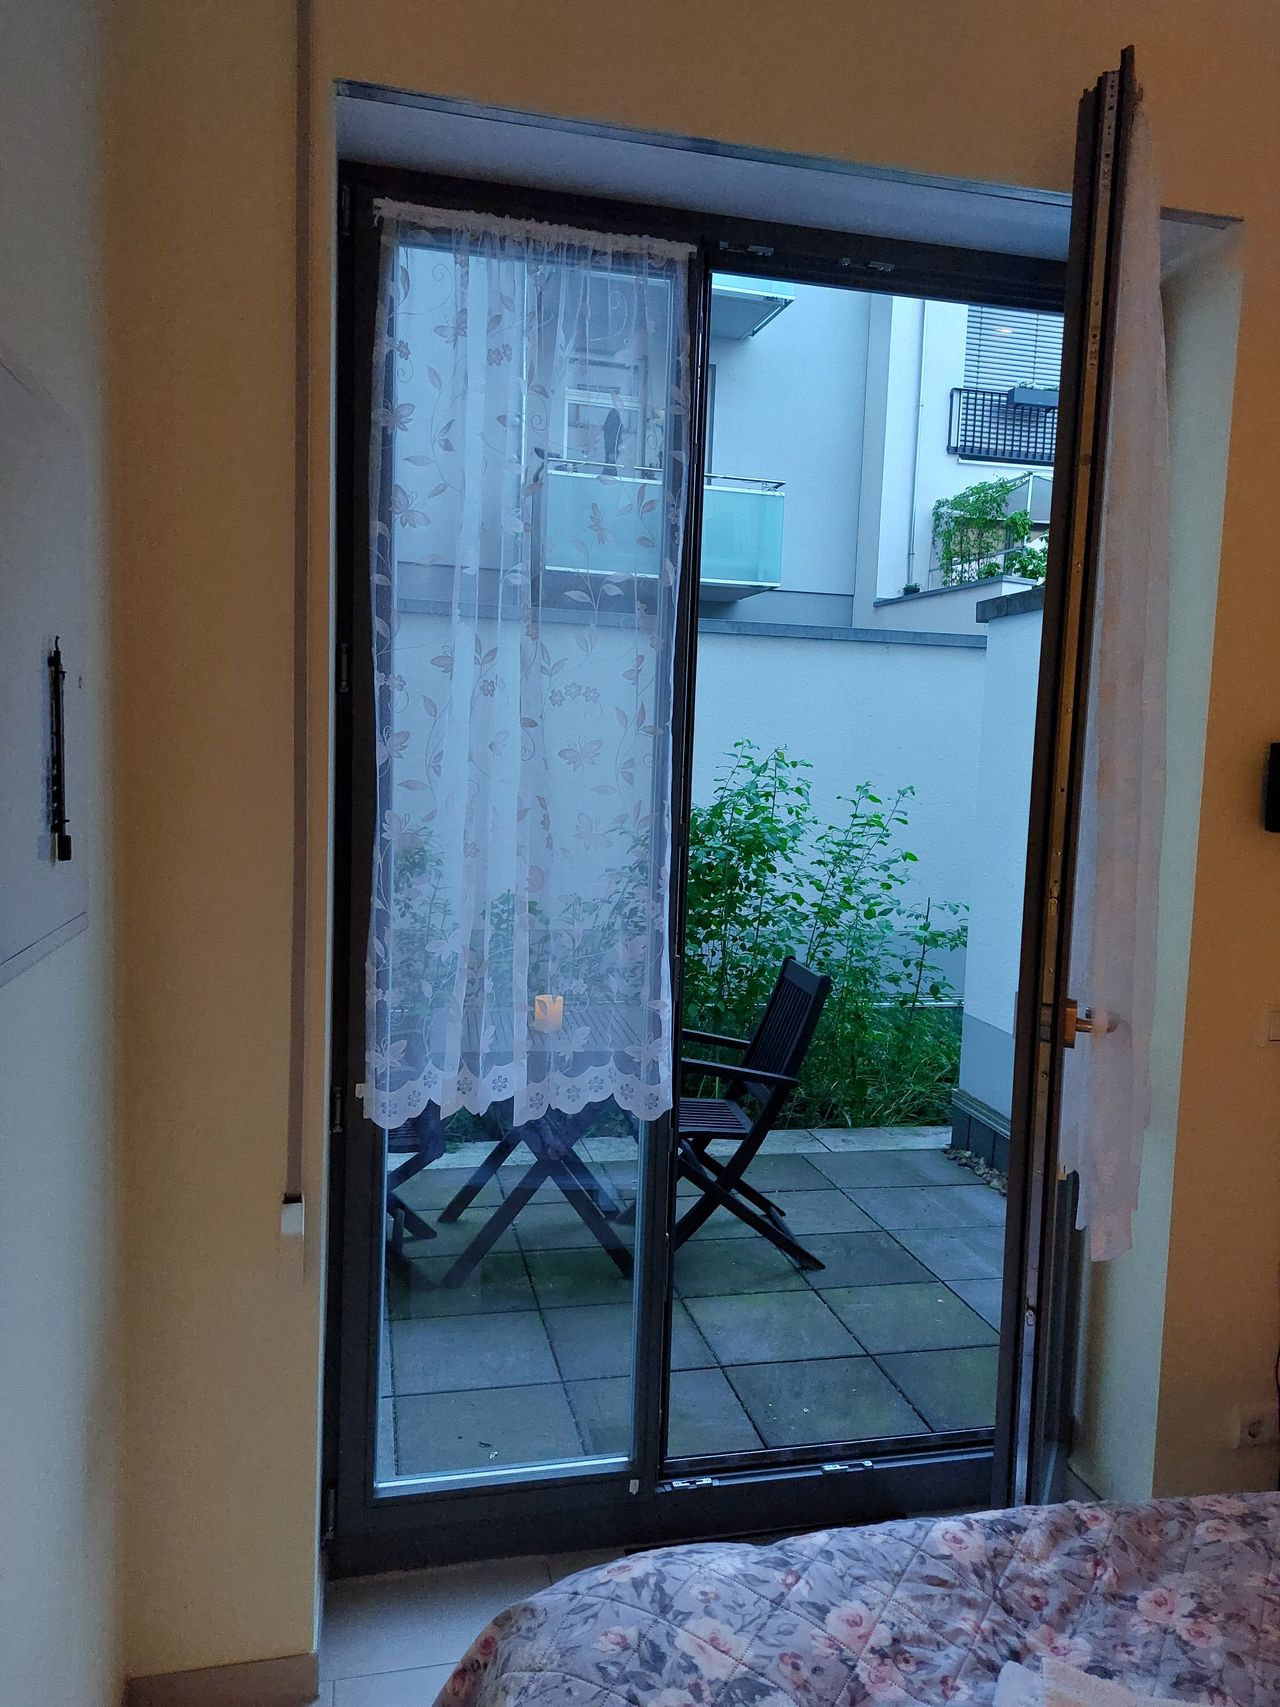 Homely & cosy flat in the old town with underground parking, Erfurt